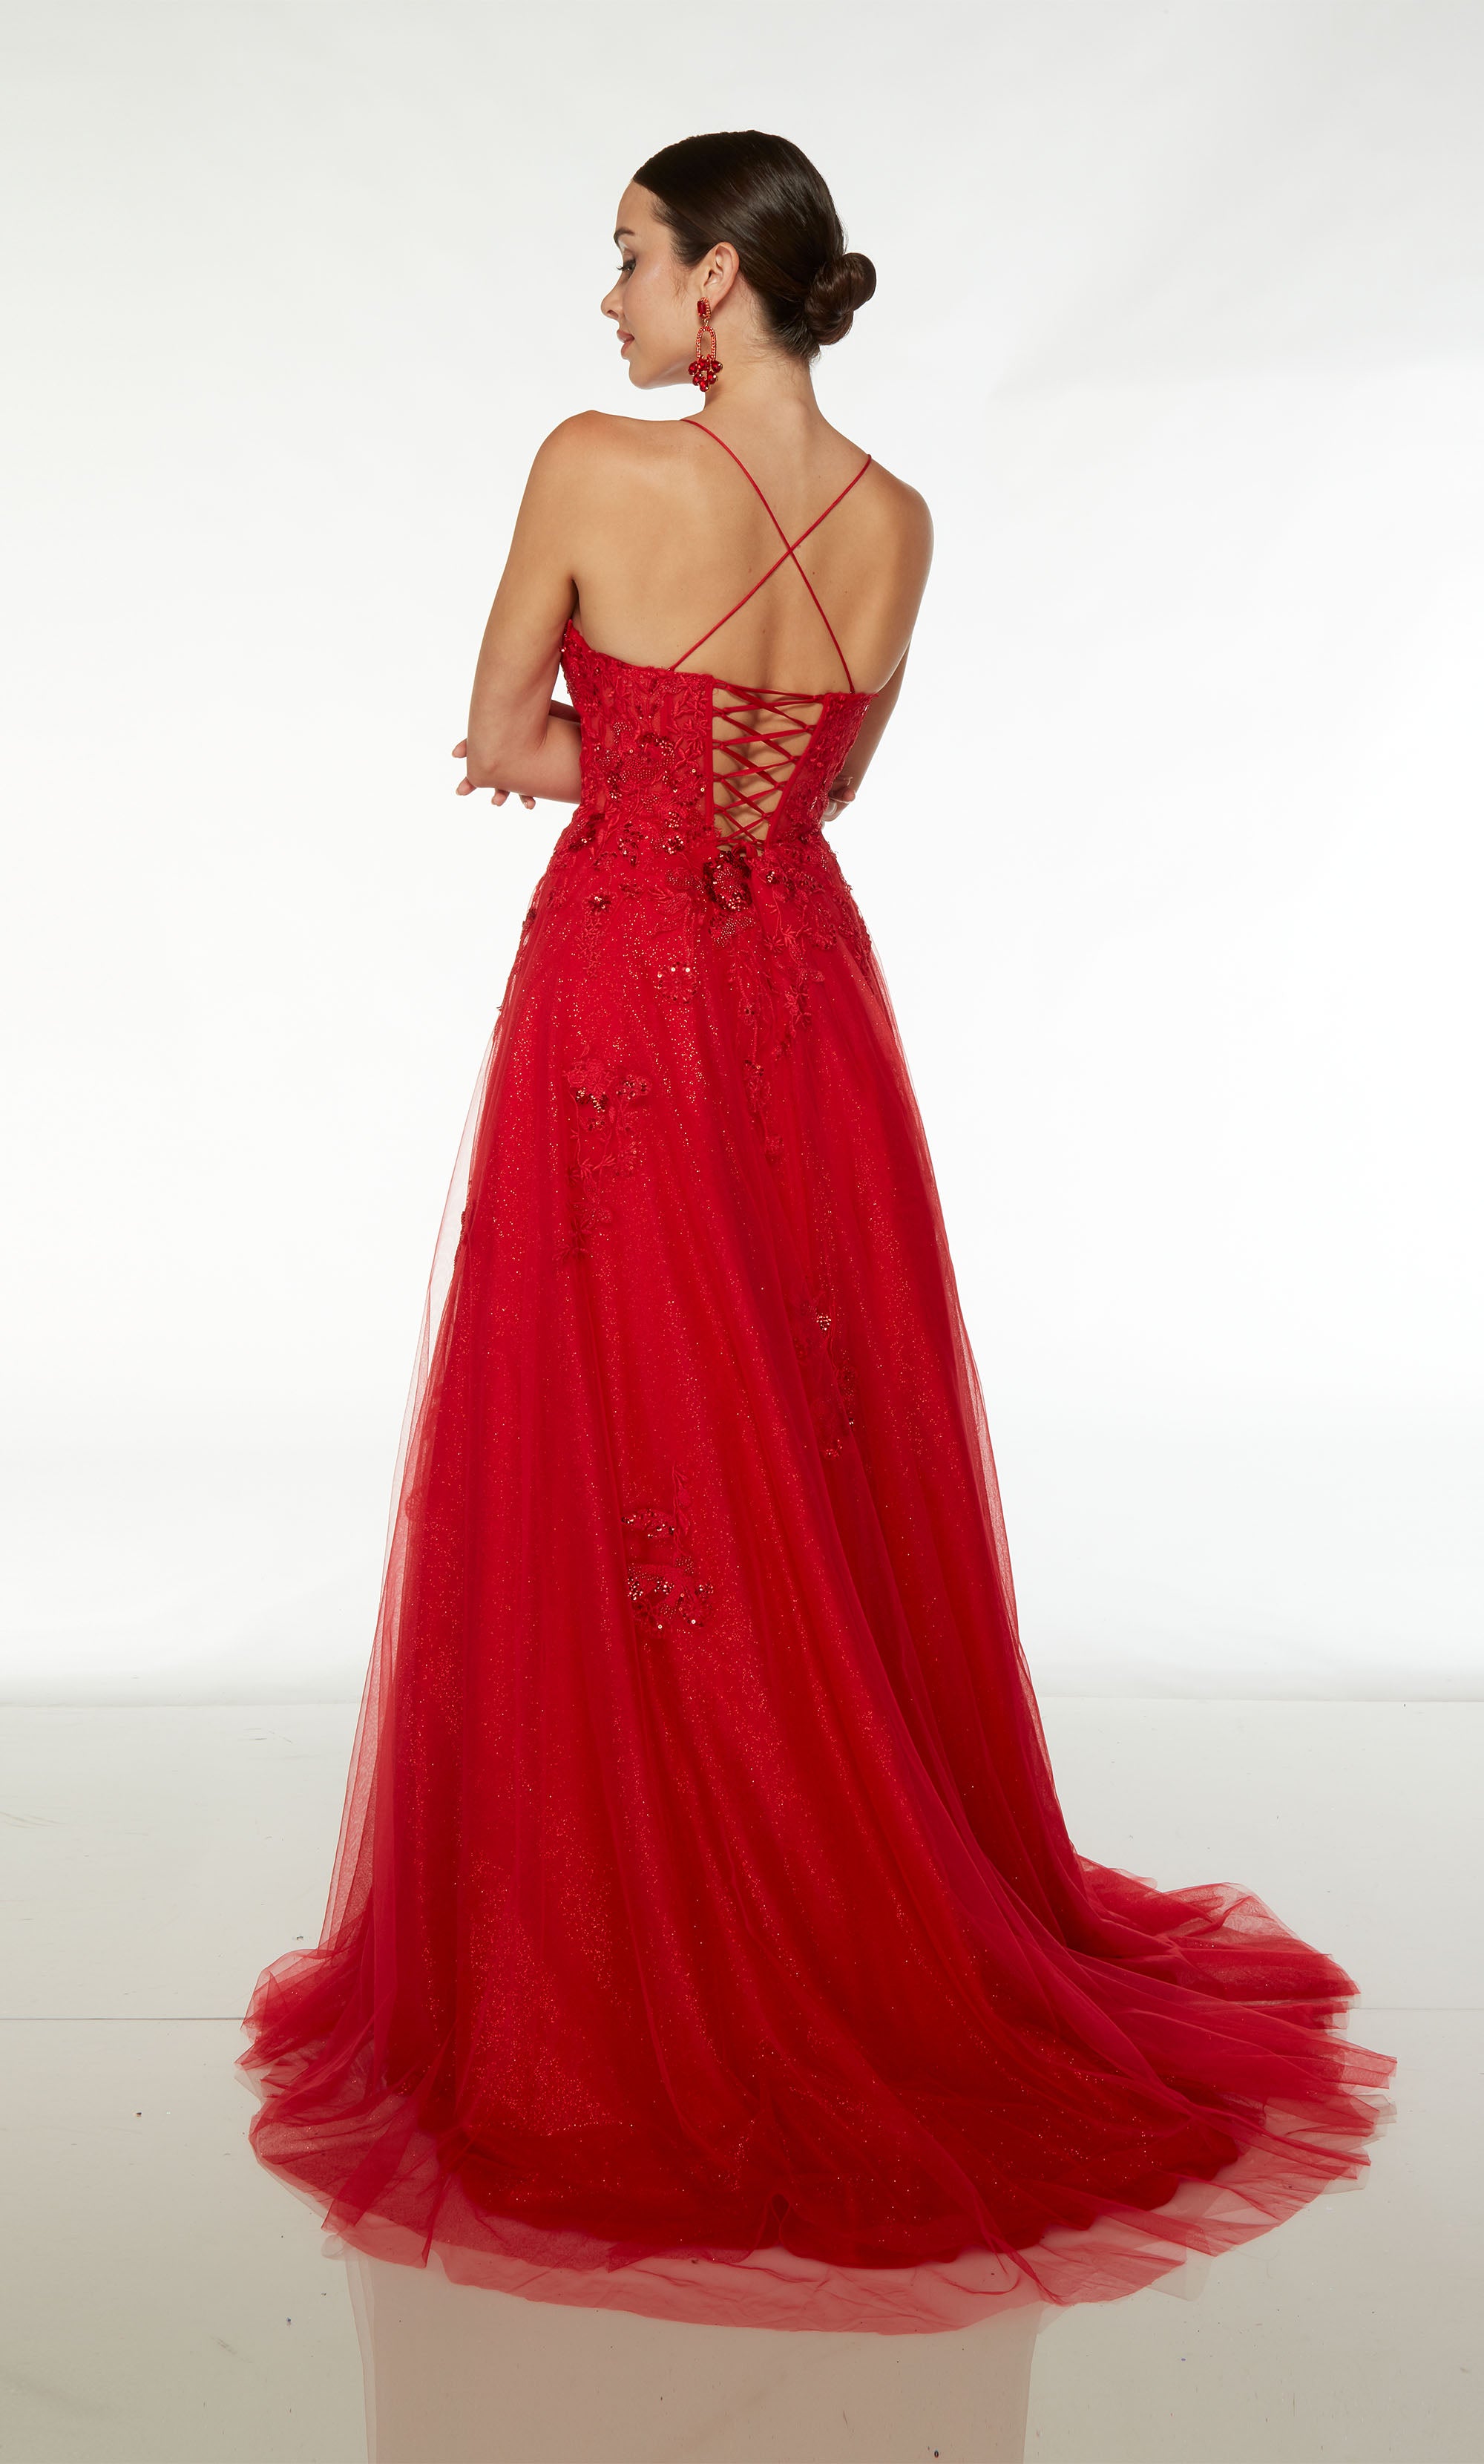 Red prom dress: Scooped neckline, A-line skirt, crisscross lace up back, and train crafted in glitter tulle and adorned with delicate beaded lace.